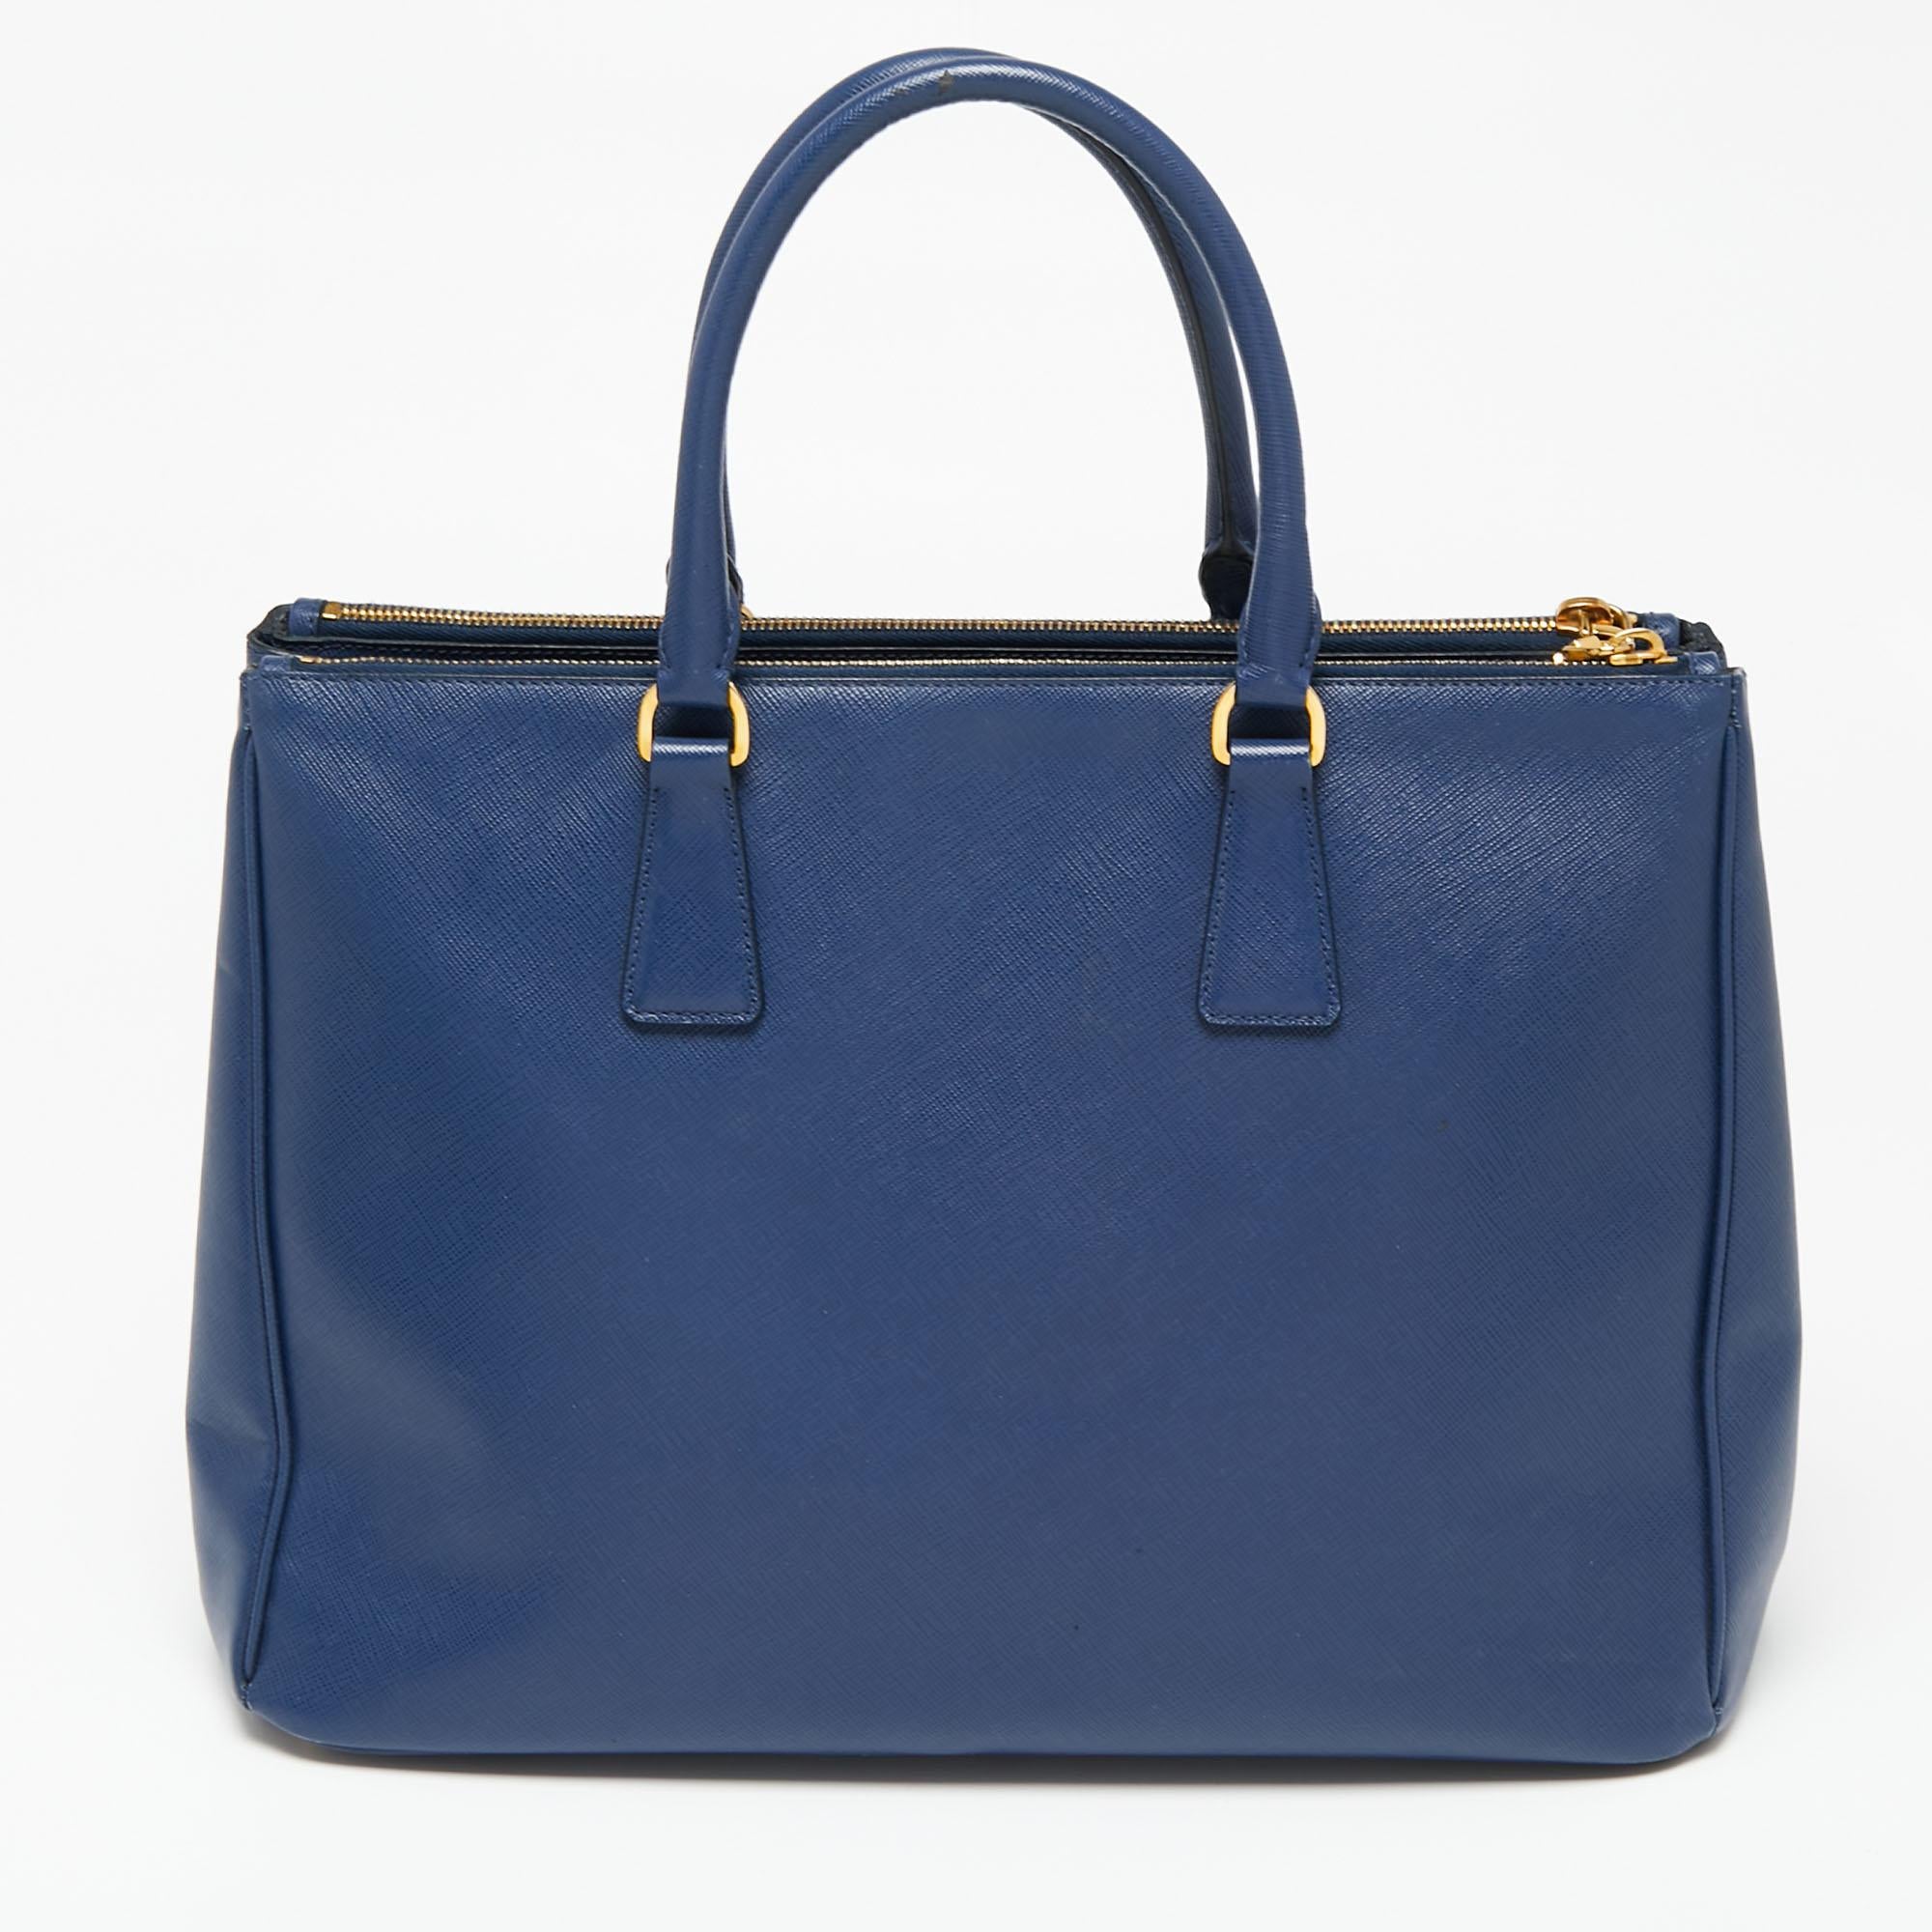 Loved for its classic appeal and functional design, Galleria is one of the most iconic and popular bags from the house of Prada. This beauty in navy blue is crafted from Saffiano Lux leather and is equipped with two top handles, the brand logo on